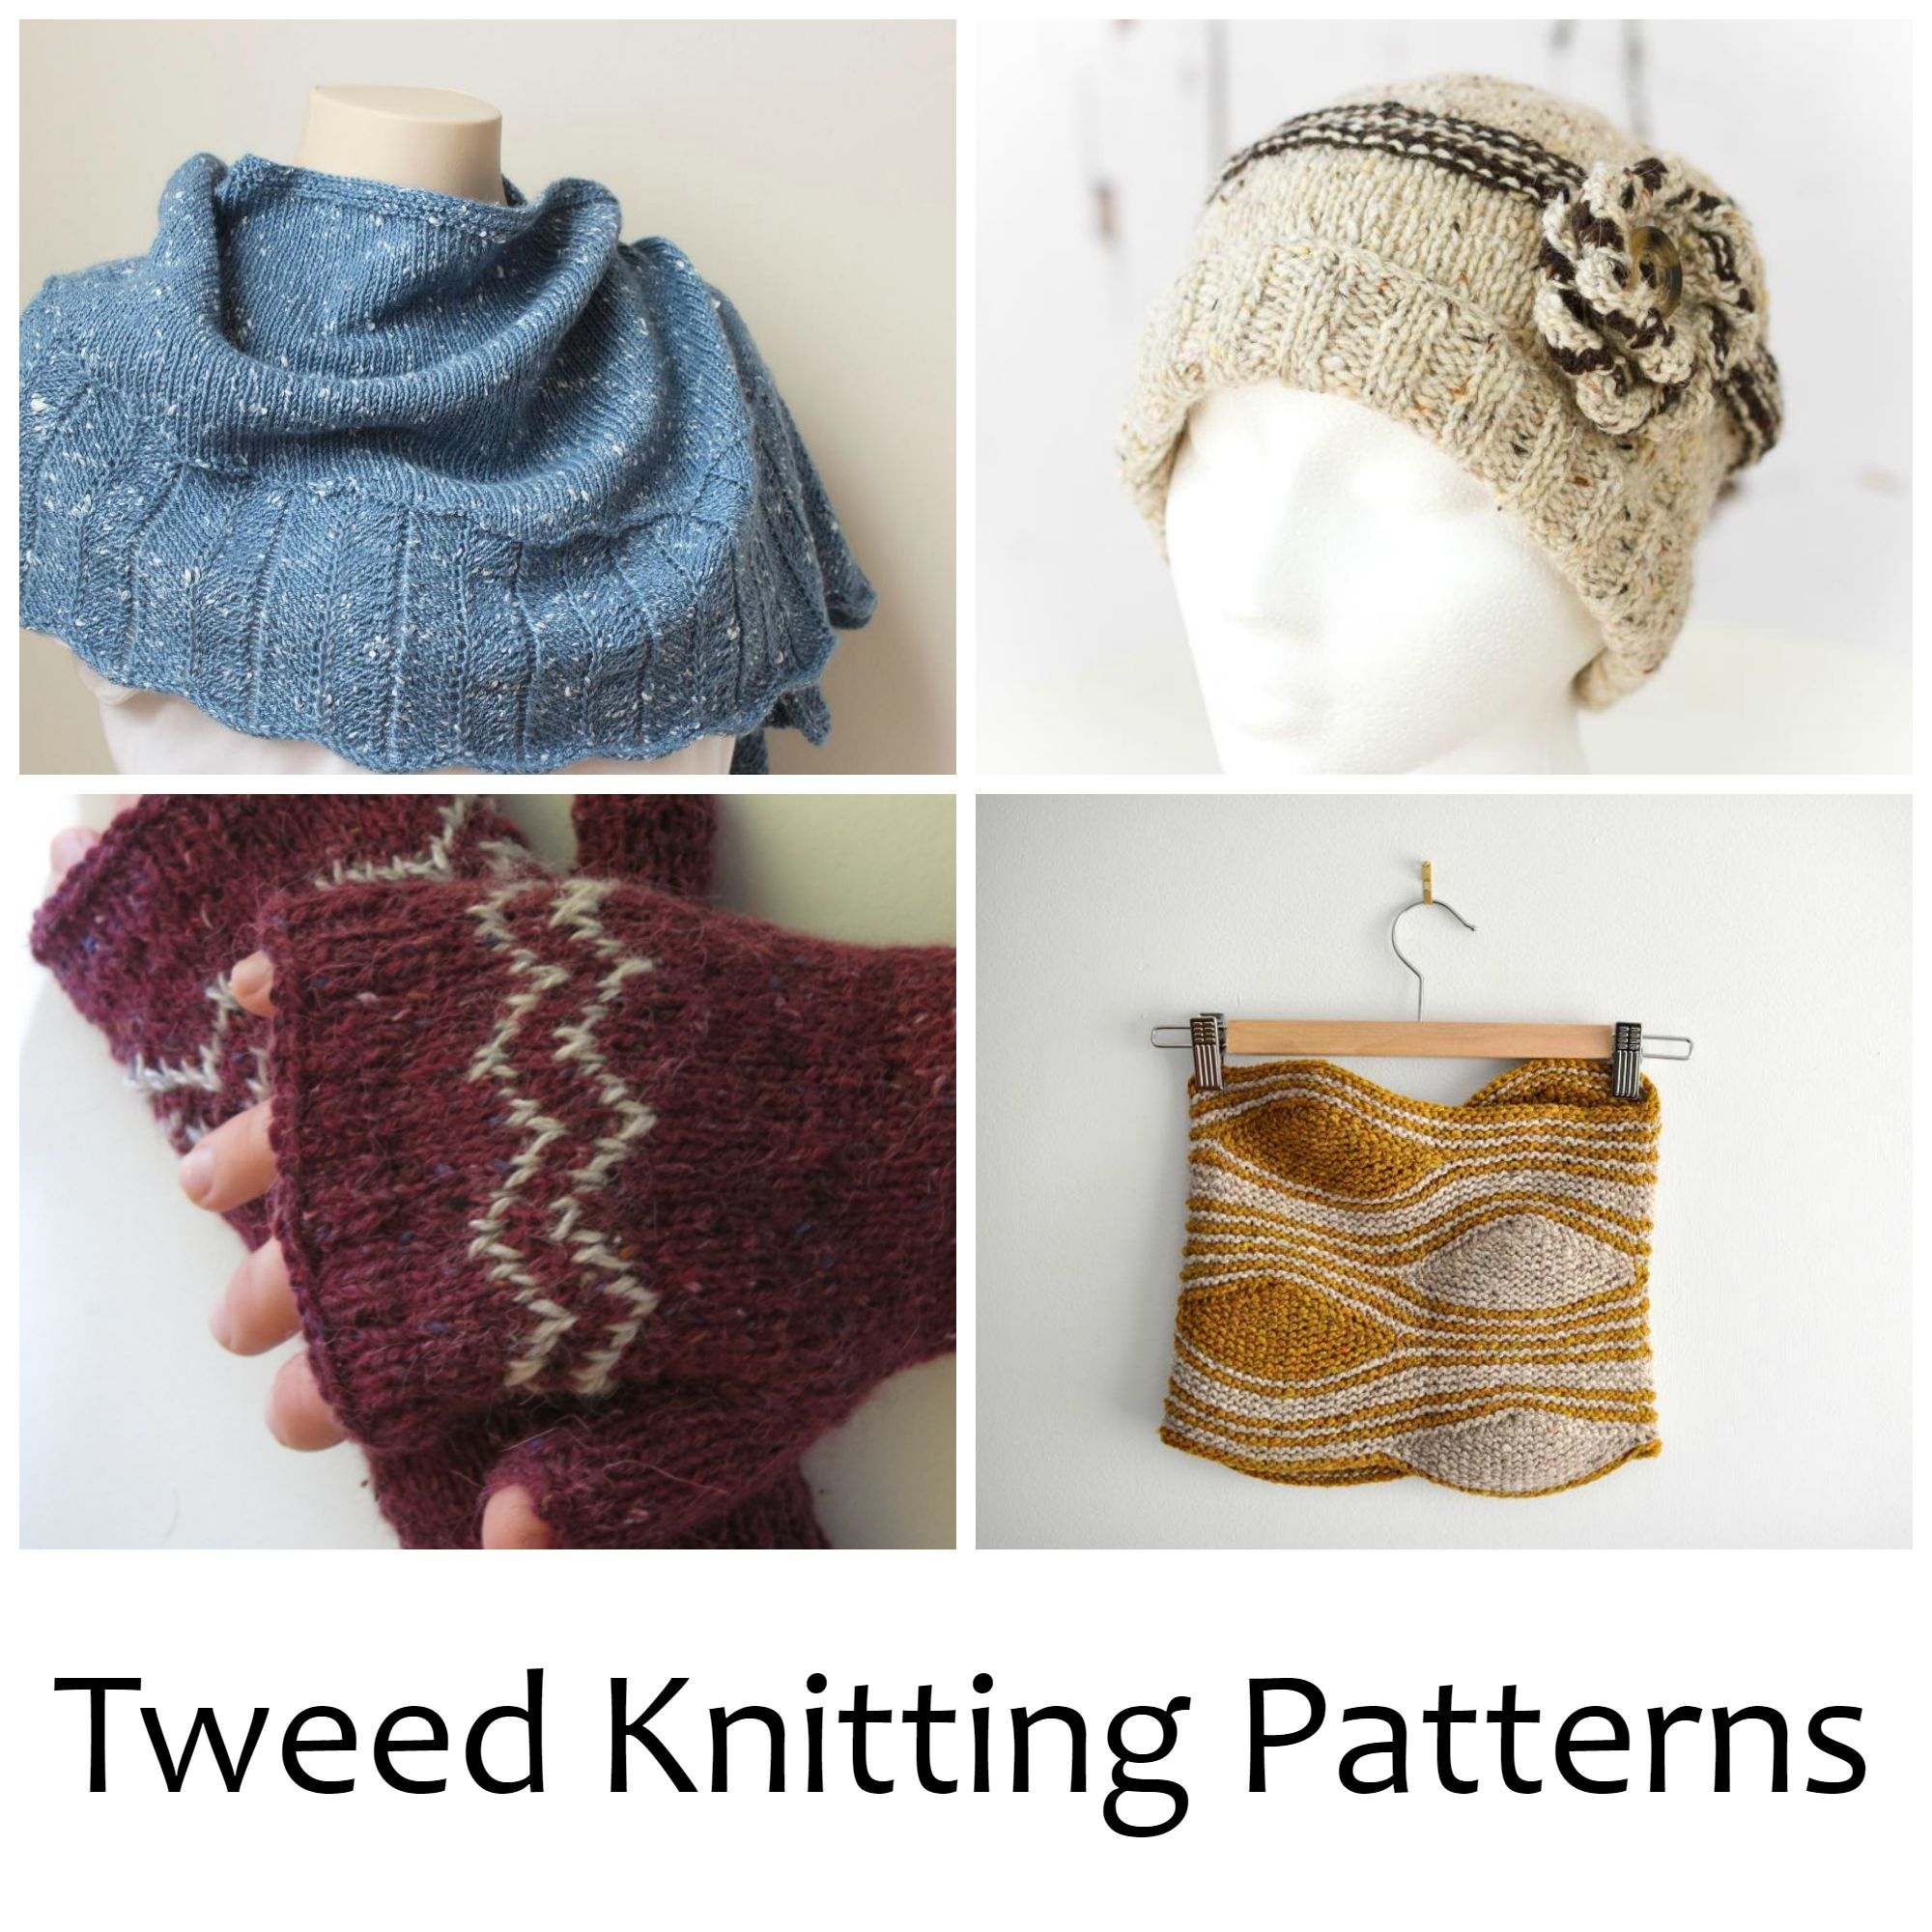 Tweed Knitting Patterns Cozy Tweed Knitting Patterns For Fall Craftsy